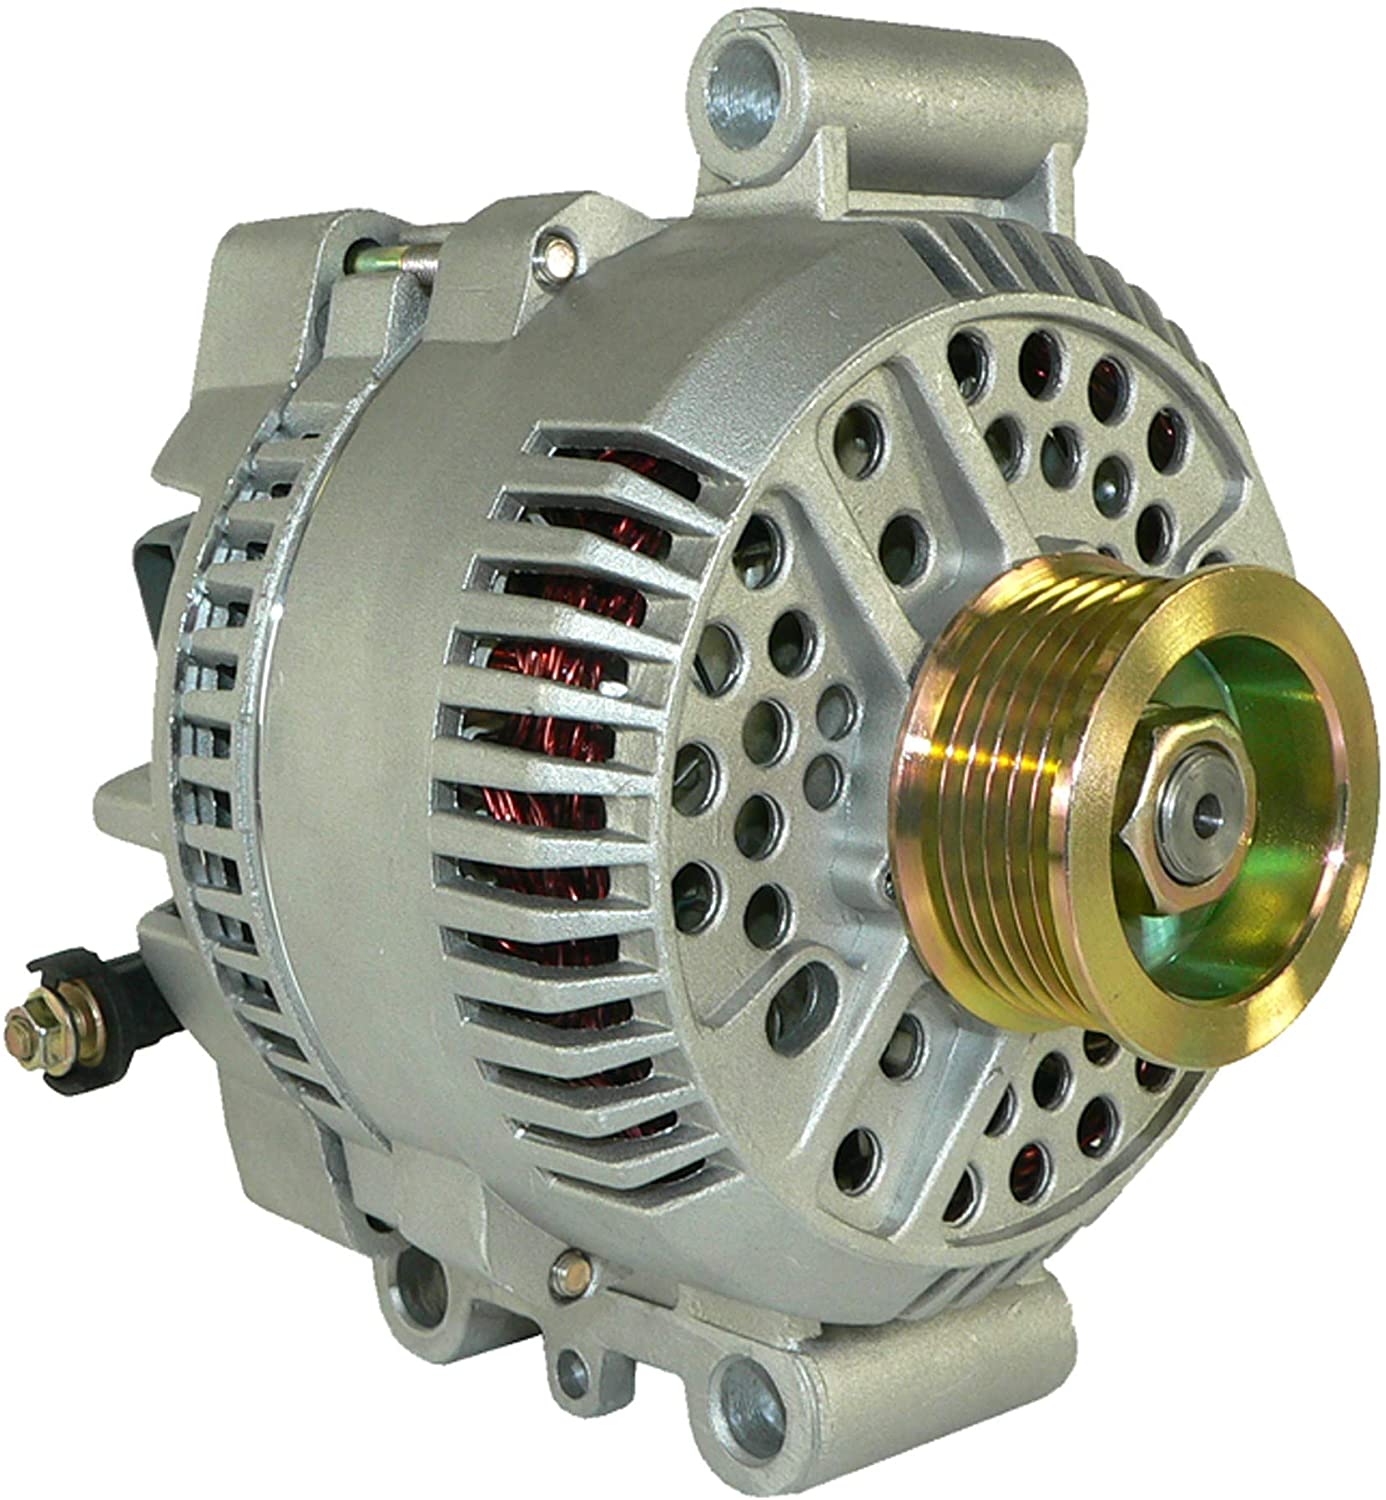 DB Electrical AFD0165 New Alternator Compatible with/Replacement for 4.0L 4.0 Ford Ranger 2007 2008 2009, Explorer Mountaineer 2004 2005 2006 2007 2008, Mazda B Series Pickup 5L2T-10300-AA